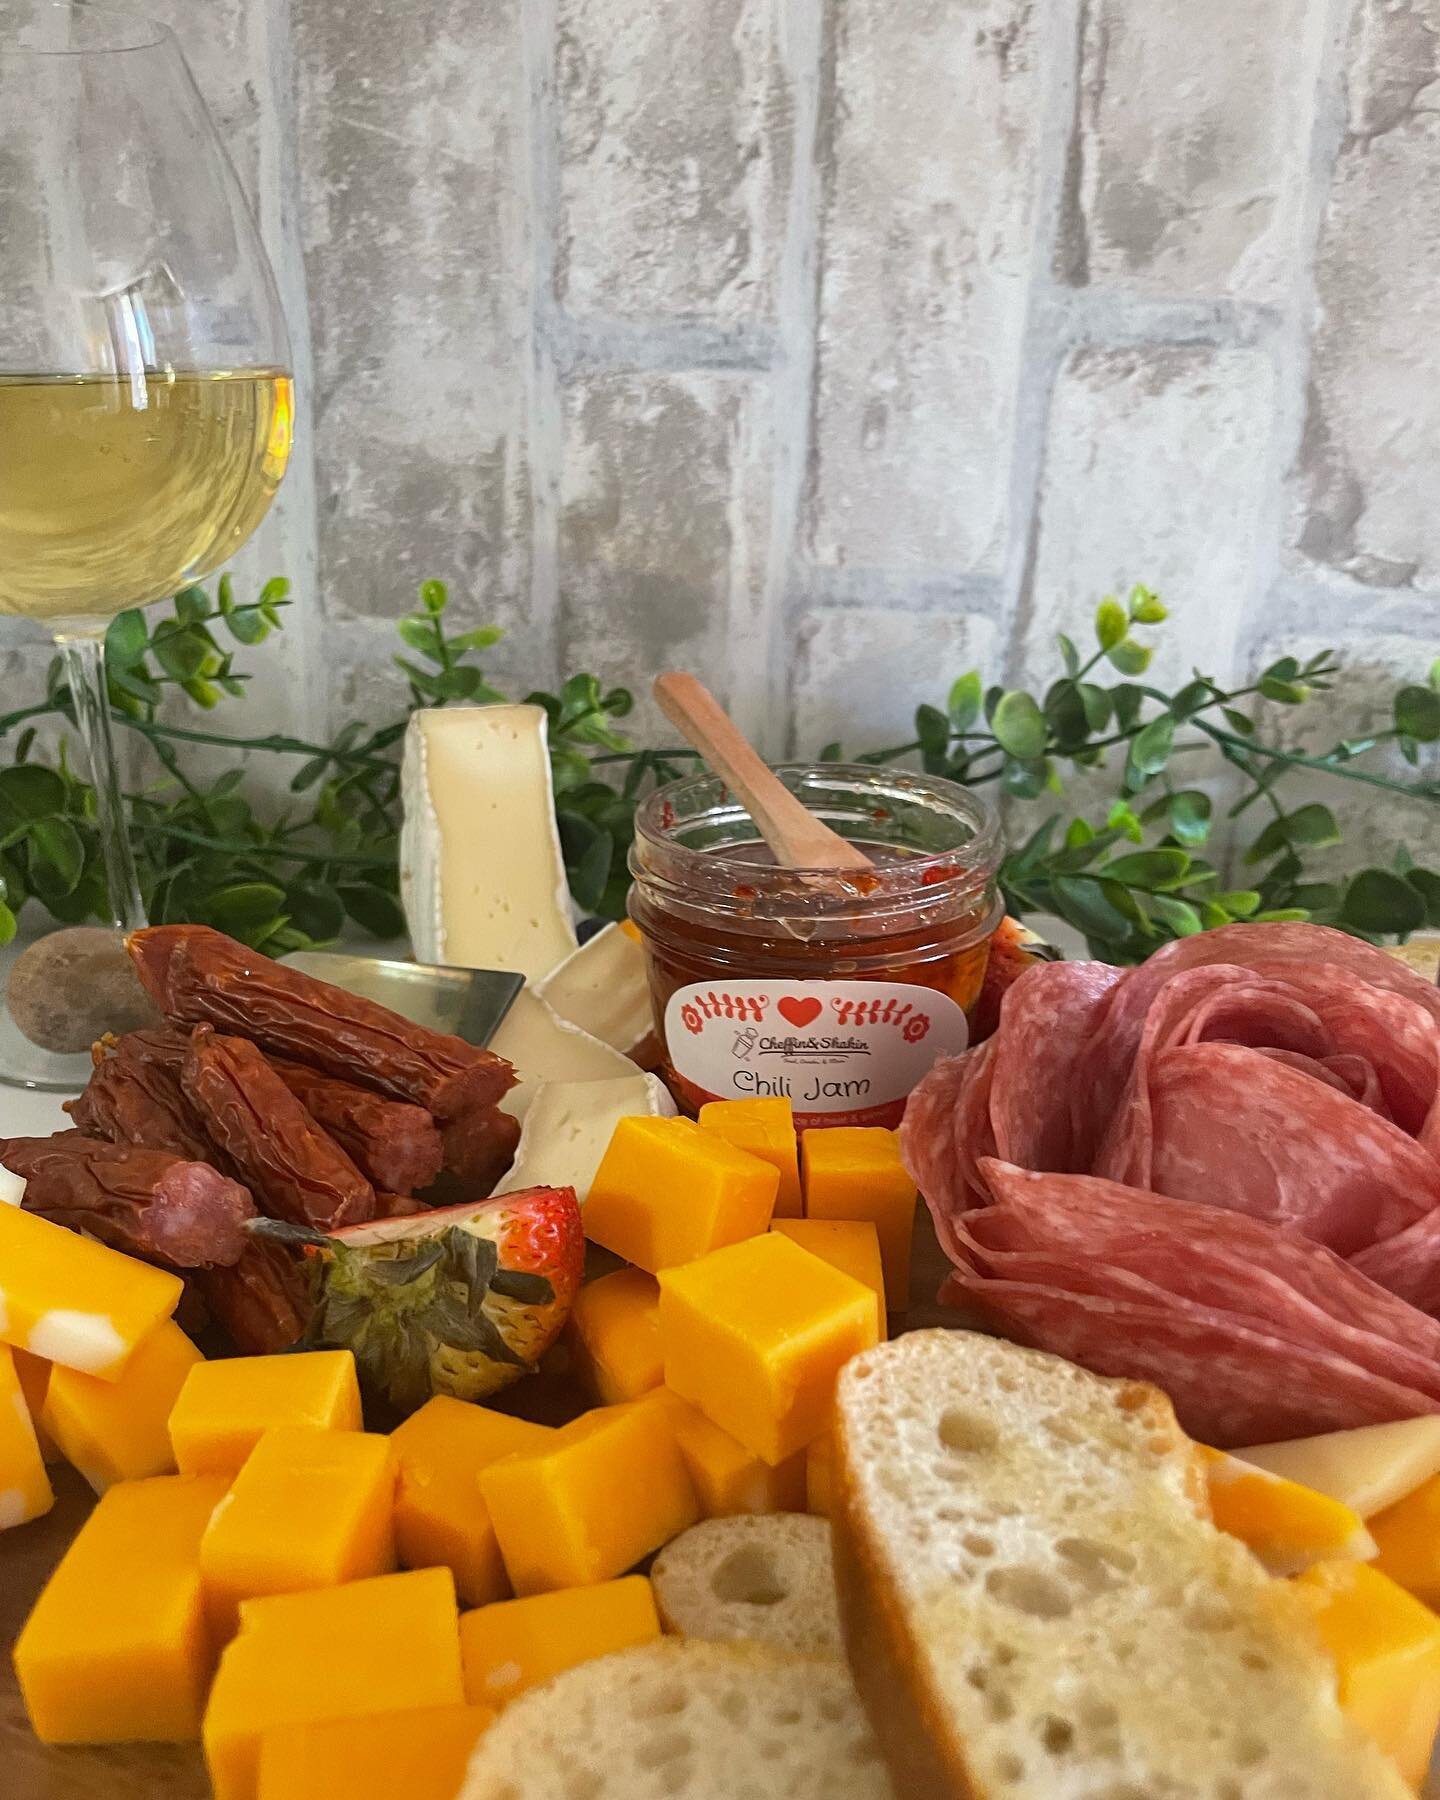 Chili Jam + Cheese = A lovely combination! 🧀🥖😍

*
*
#cheeseboard #cheeselover #chilijam #baguette #spread #jams #cheeseboardspread #chili #condiments #spreads #cheffinandshakin #cheeseboardsofinstagram #cheesespread #winetime